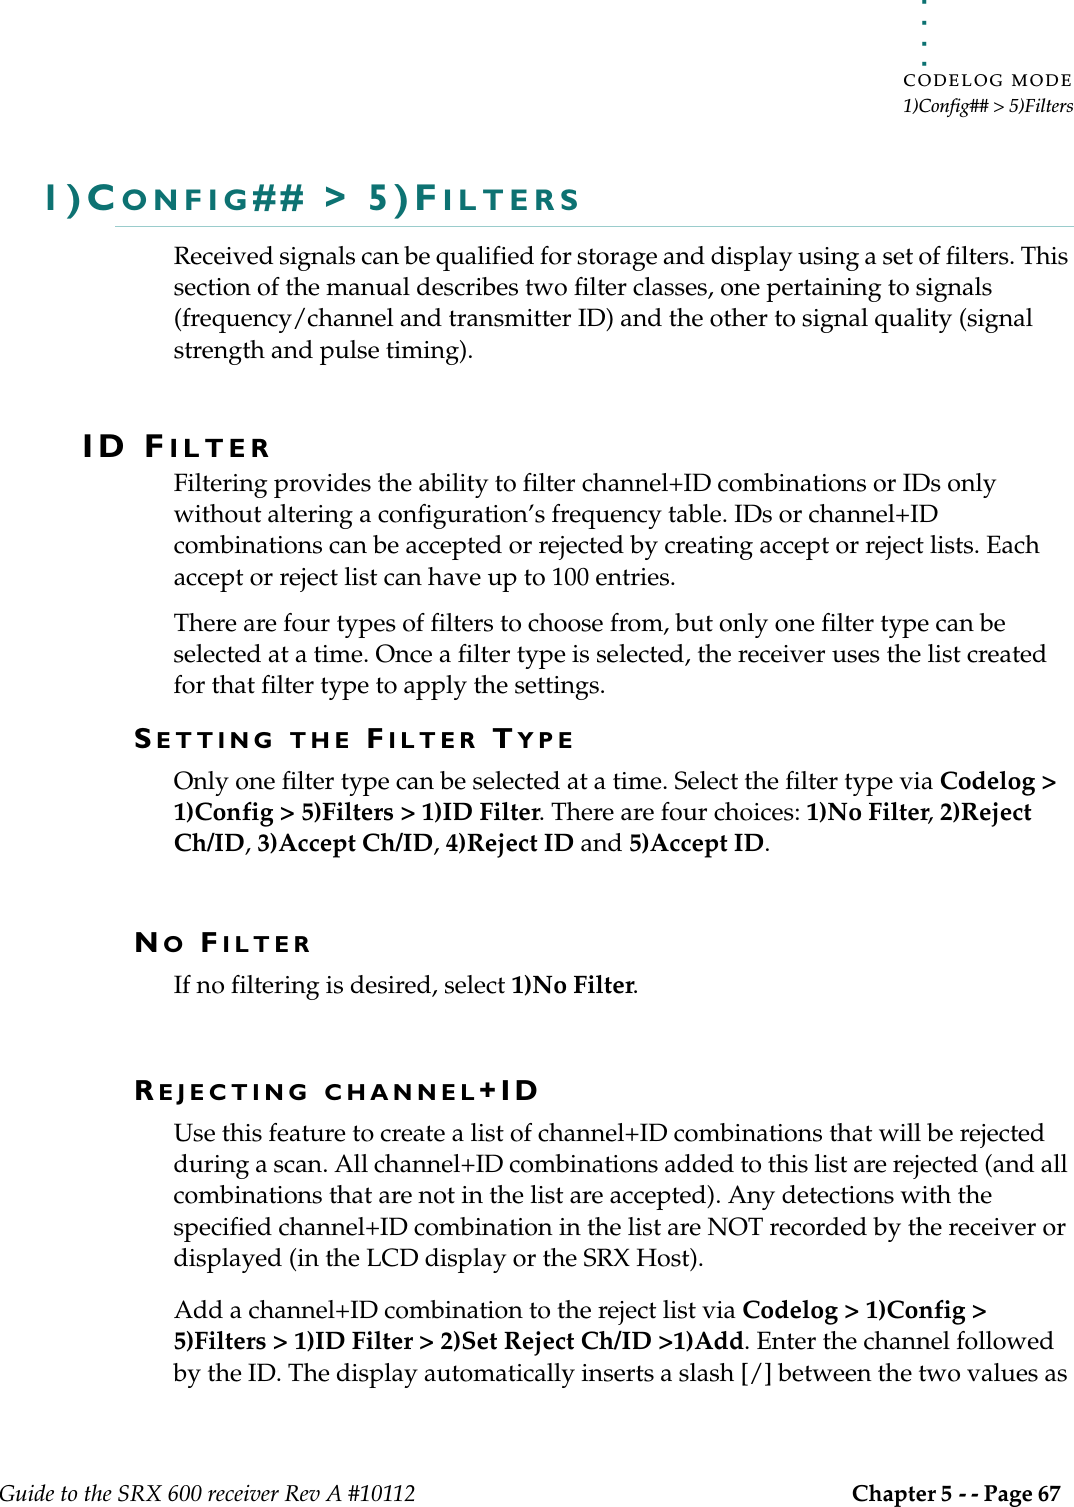 . . . . .CODELOG MODE1)Config## &gt; 5)FiltersGuide to the SRX 600 receiver Rev A #10112 Chapter 5 - - Page 67 1)CONFIG## &gt; 5)FILTERSReceived signals can be qualified for storage and display using a set of filters. This section of the manual describes two filter classes, one pertaining to signals (frequency/channel and transmitter ID) and the other to signal quality (signal strength and pulse timing).ID FILTERFiltering provides the ability to filter channel+ID combinations or IDs only without altering a configuration’s frequency table. IDs or channel+ID combinations can be accepted or rejected by creating accept or reject lists. Each accept or reject list can have up to 100 entries. There are four types of filters to choose from, but only one filter type can be selected at a time. Once a filter type is selected, the receiver uses the list created for that filter type to apply the settings.SETTING THE FILTER TYPEOnly one filter type can be selected at a time. Select the filter type via Codelog &gt; 1)Config &gt; 5)Filters &gt; 1)ID Filter. There are four choices: 1)No Filter, 2)Reject Ch/ID, 3)Accept Ch/ID, 4)Reject ID and 5)Accept ID.NO FILTERIf no filtering is desired, select 1)No Filter.REJECTING CHANNEL+IDUse this feature to create a list of channel+ID combinations that will be rejected during a scan. All channel+ID combinations added to this list are rejected (and all combinations that are not in the list are accepted). Any detections with the specified channel+ID combination in the list are NOT recorded by the receiver or displayed (in the LCD display or the SRX Host).Add a channel+ID combination to the reject list via Codelog &gt; 1)Config &gt; 5)Filters &gt; 1)ID Filter &gt; 2)Set Reject Ch/ID &gt;1)Add. Enter the channel followed by the ID. The display automatically inserts a slash [/] between the two values as 